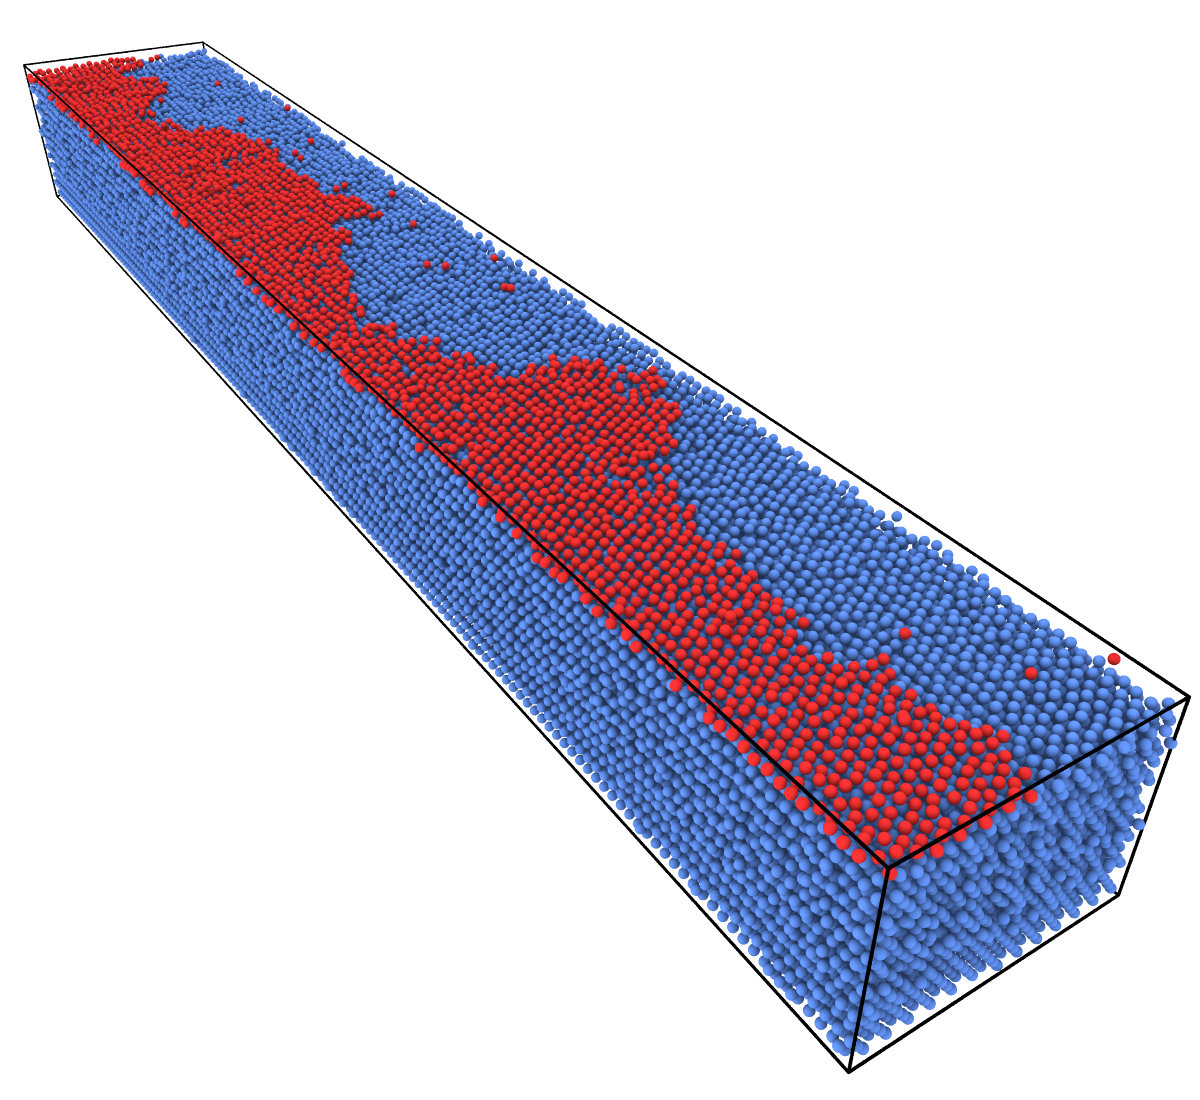 Capillary wave fluctuation of a rough surface step.